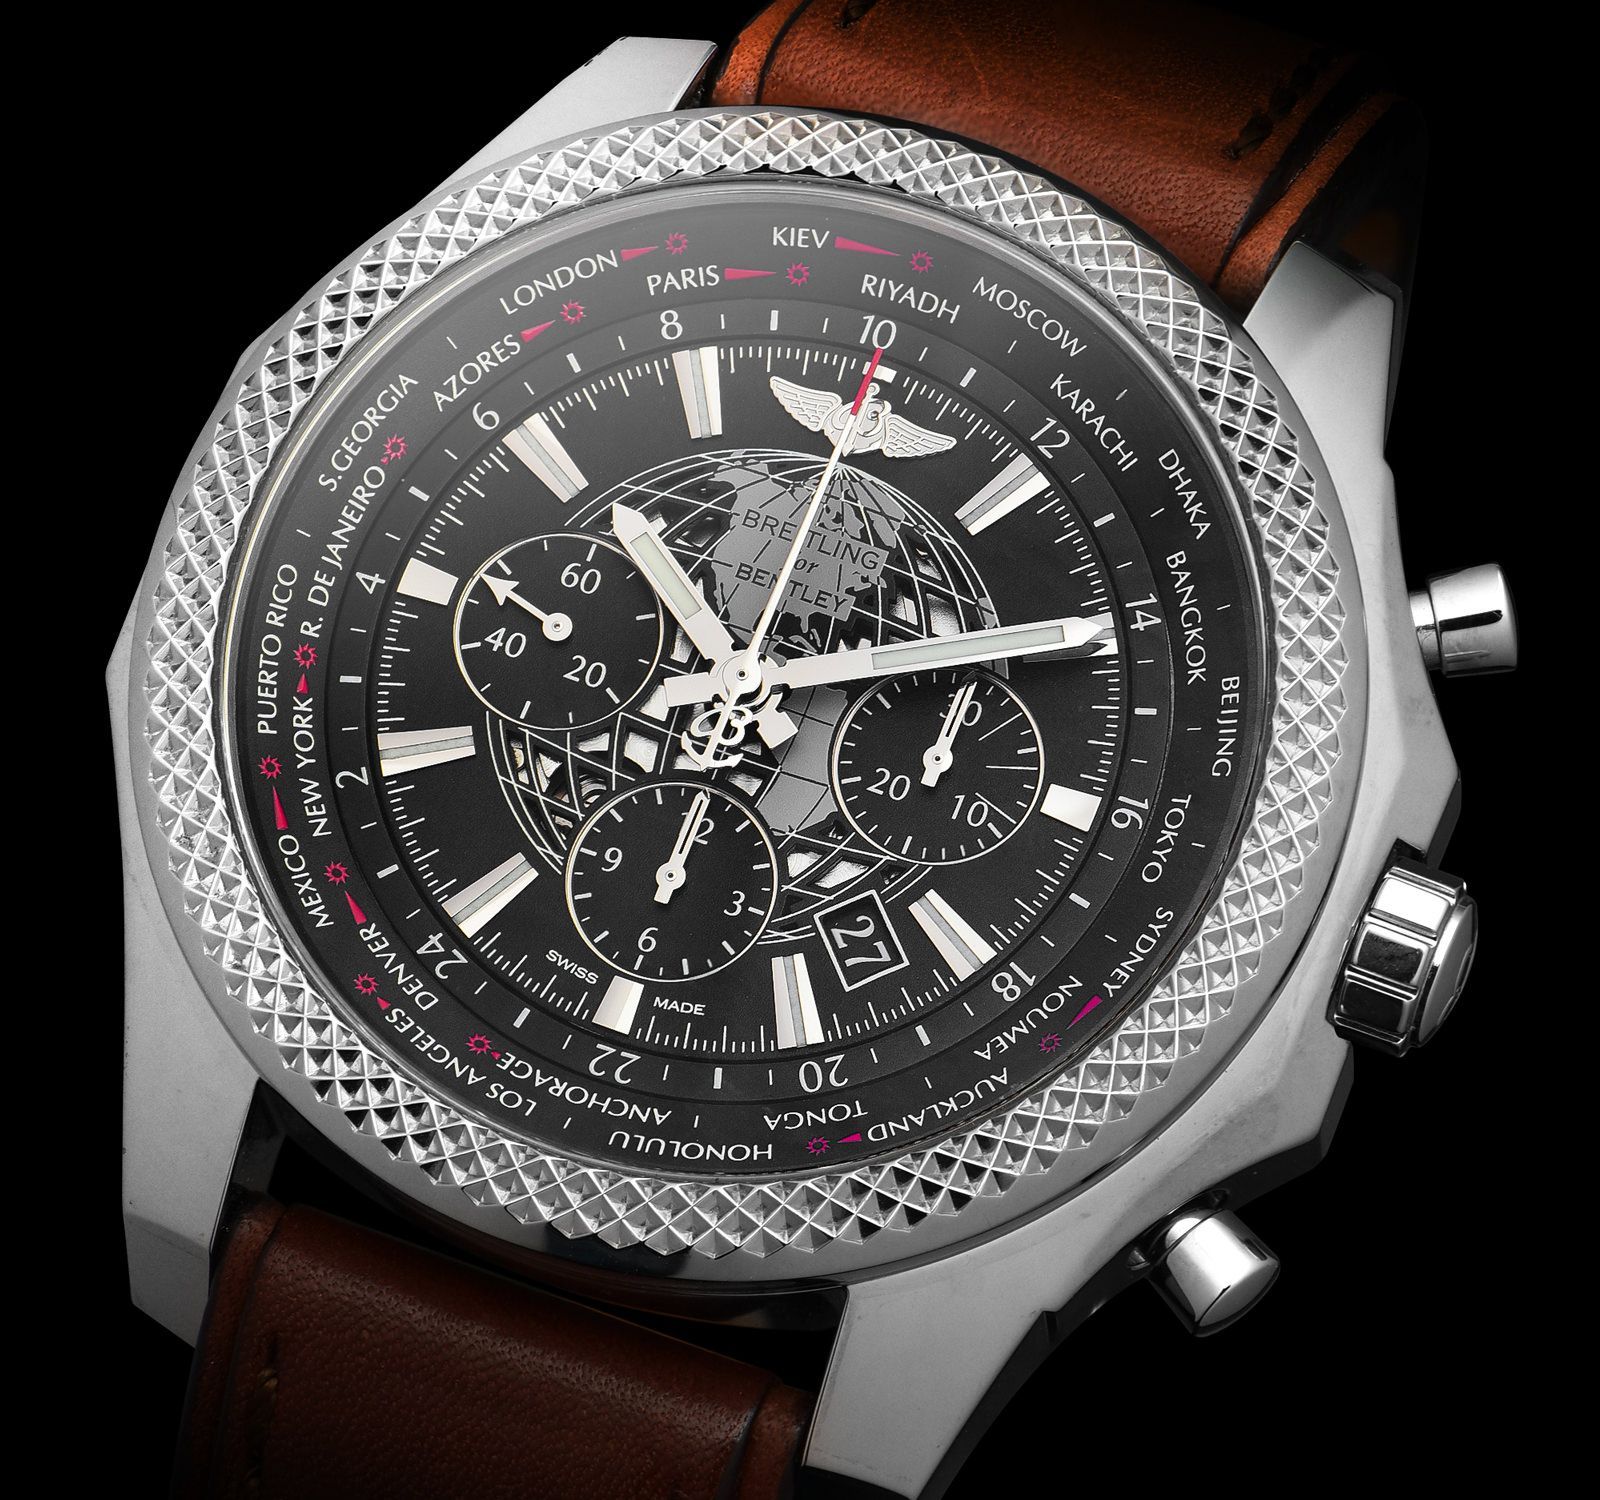 Breitling Top Time Features